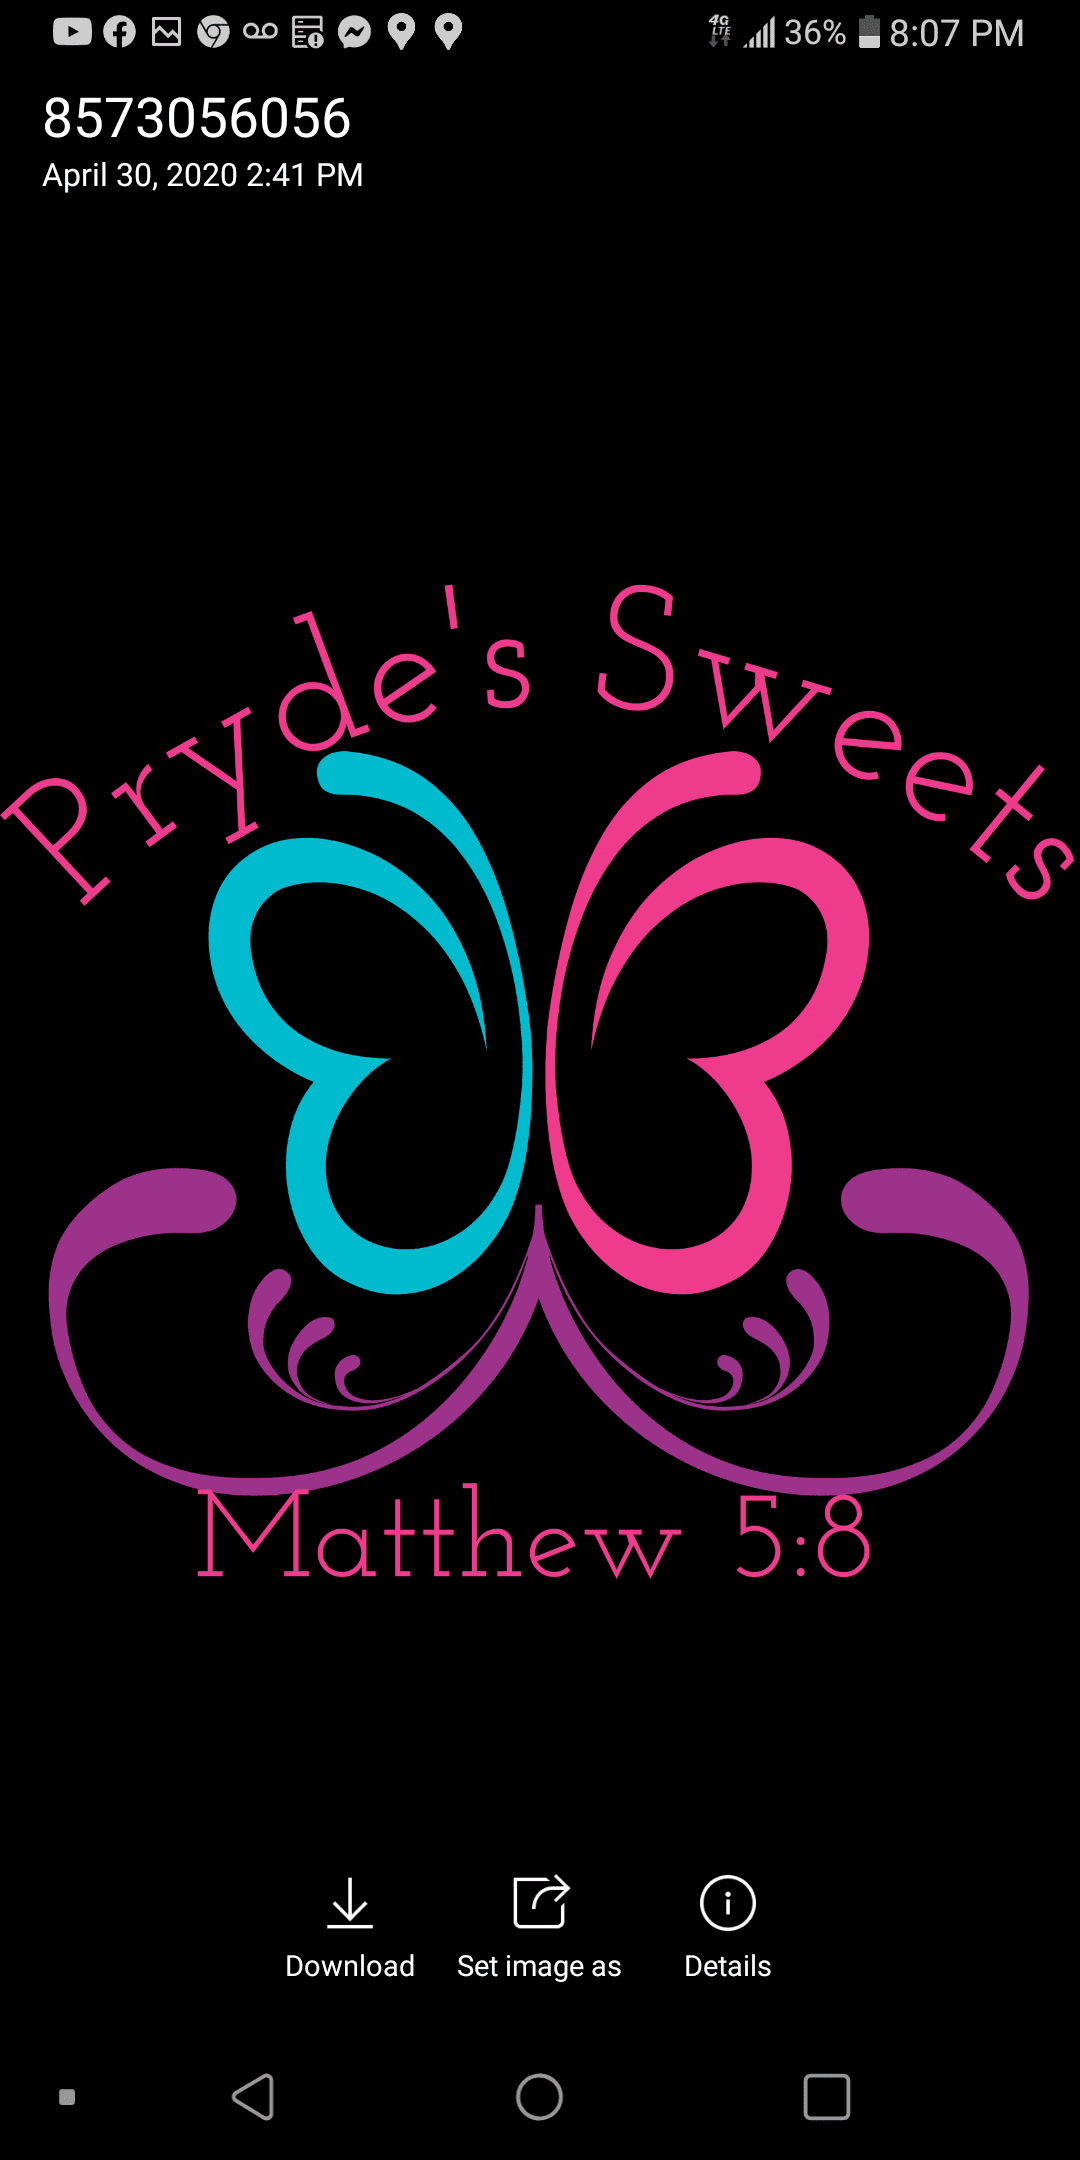 Pryde's Sweets